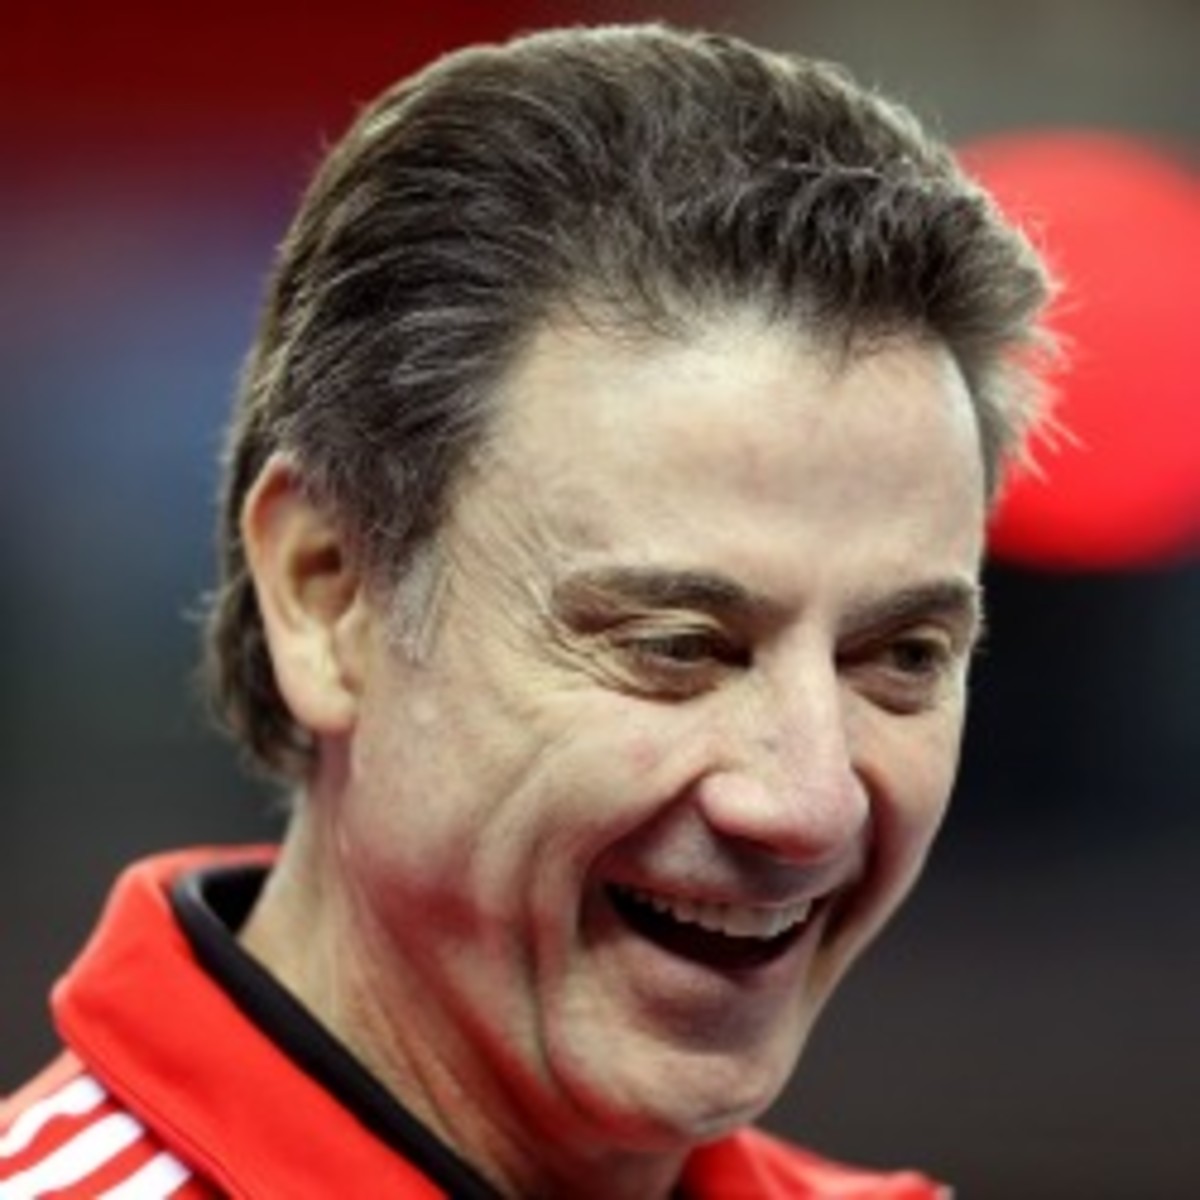 Louisville head coach John Pitino will be inducted into the basketball Hall of Fame (Andy Lyons/Getty Images)